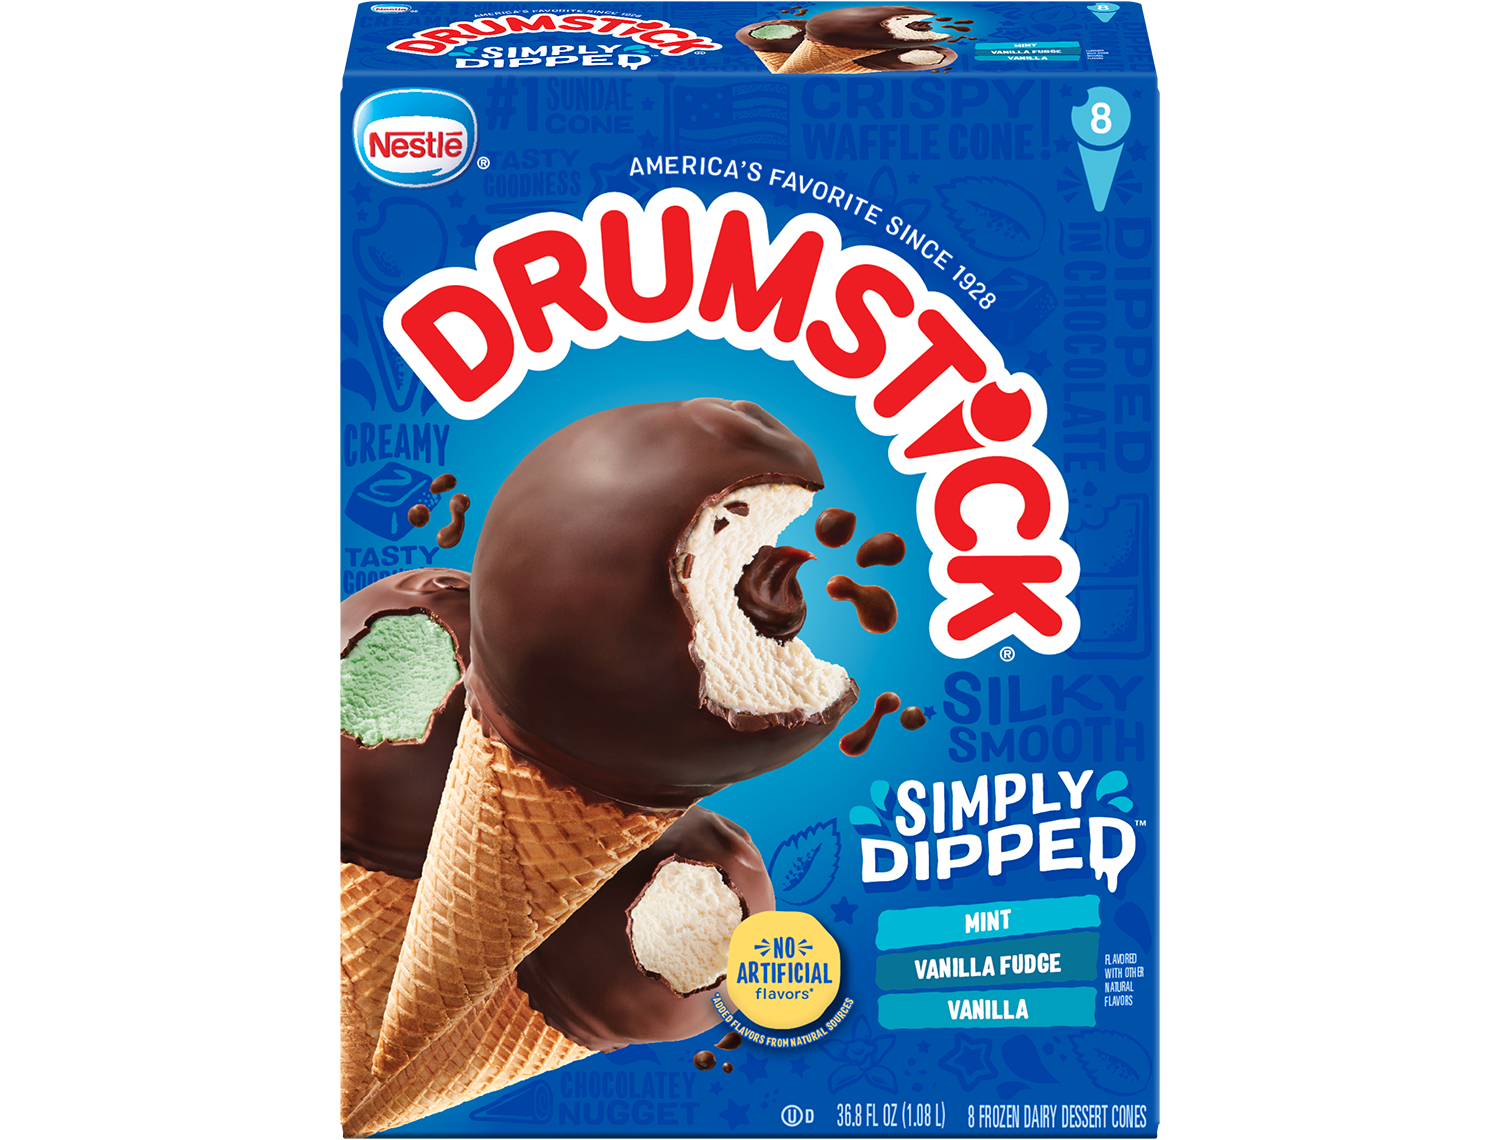 Photo of Drumstick Simply Dipped mint, vanilla fudge and vanilla in retail packaging.